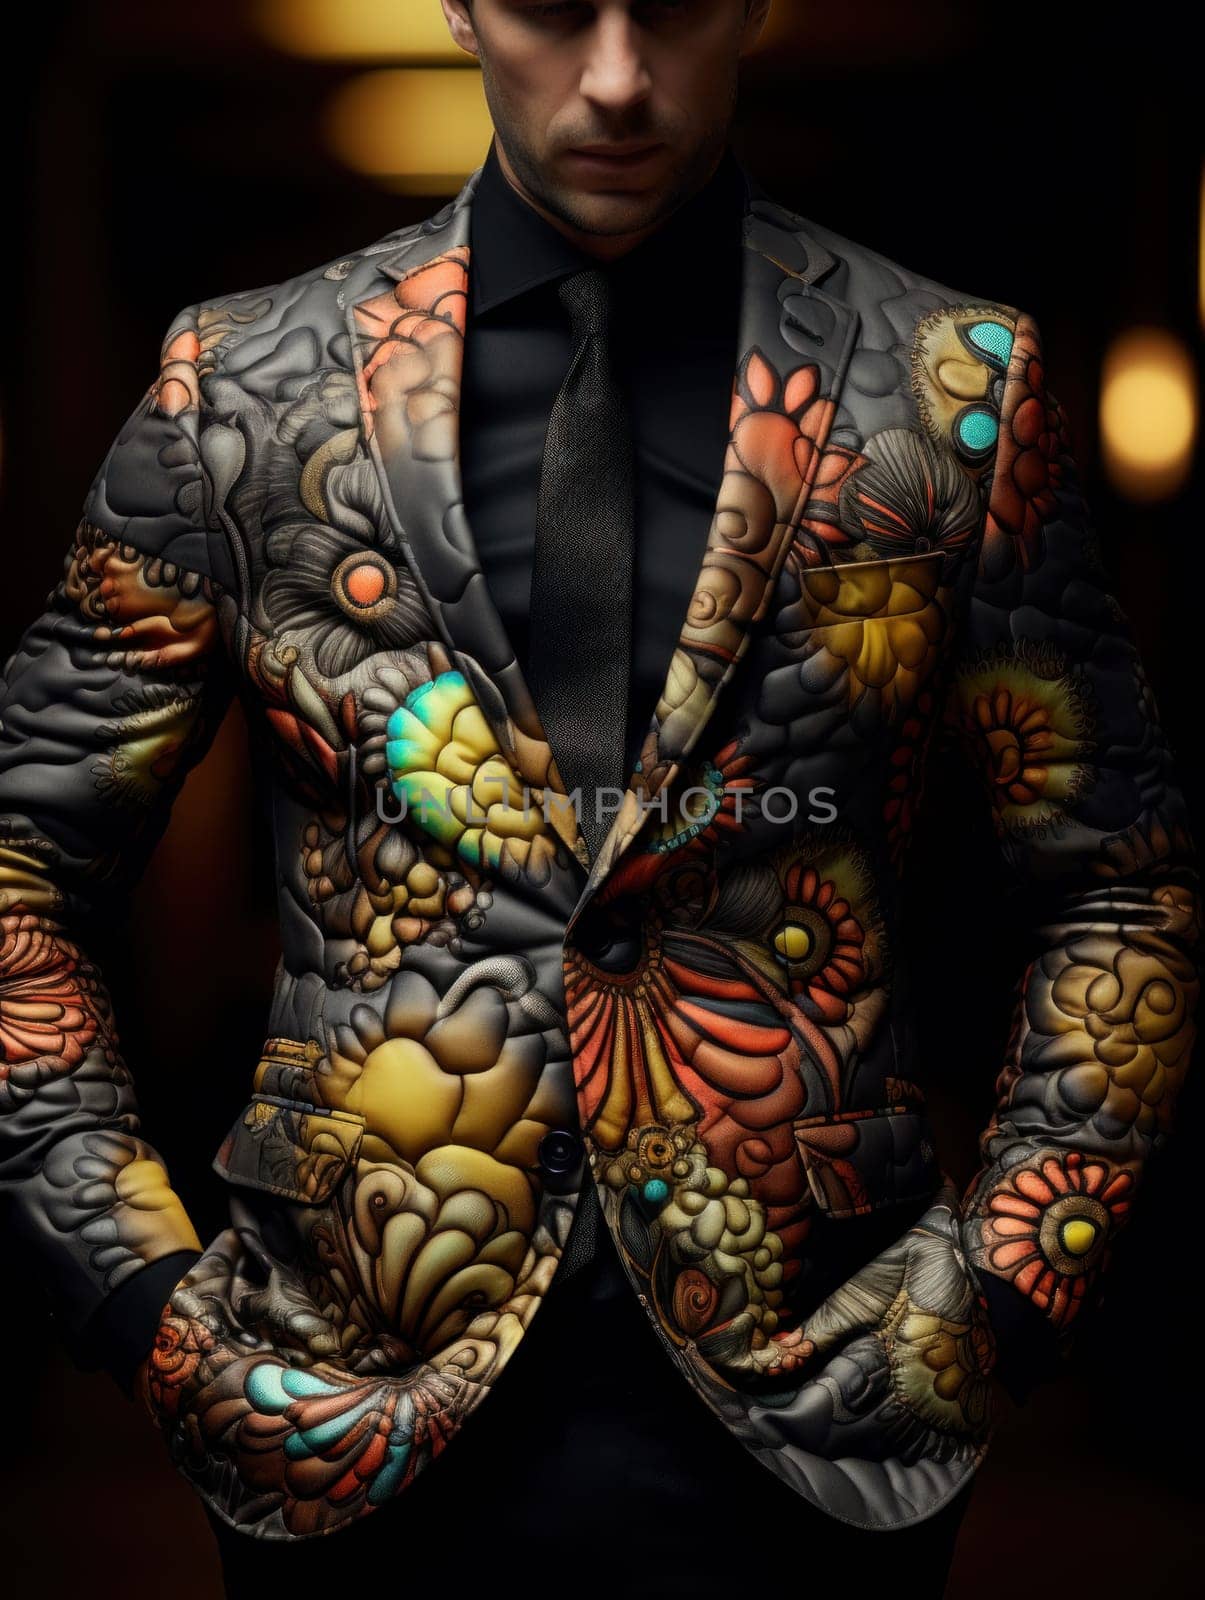 A man in a suit with flowers on it standing